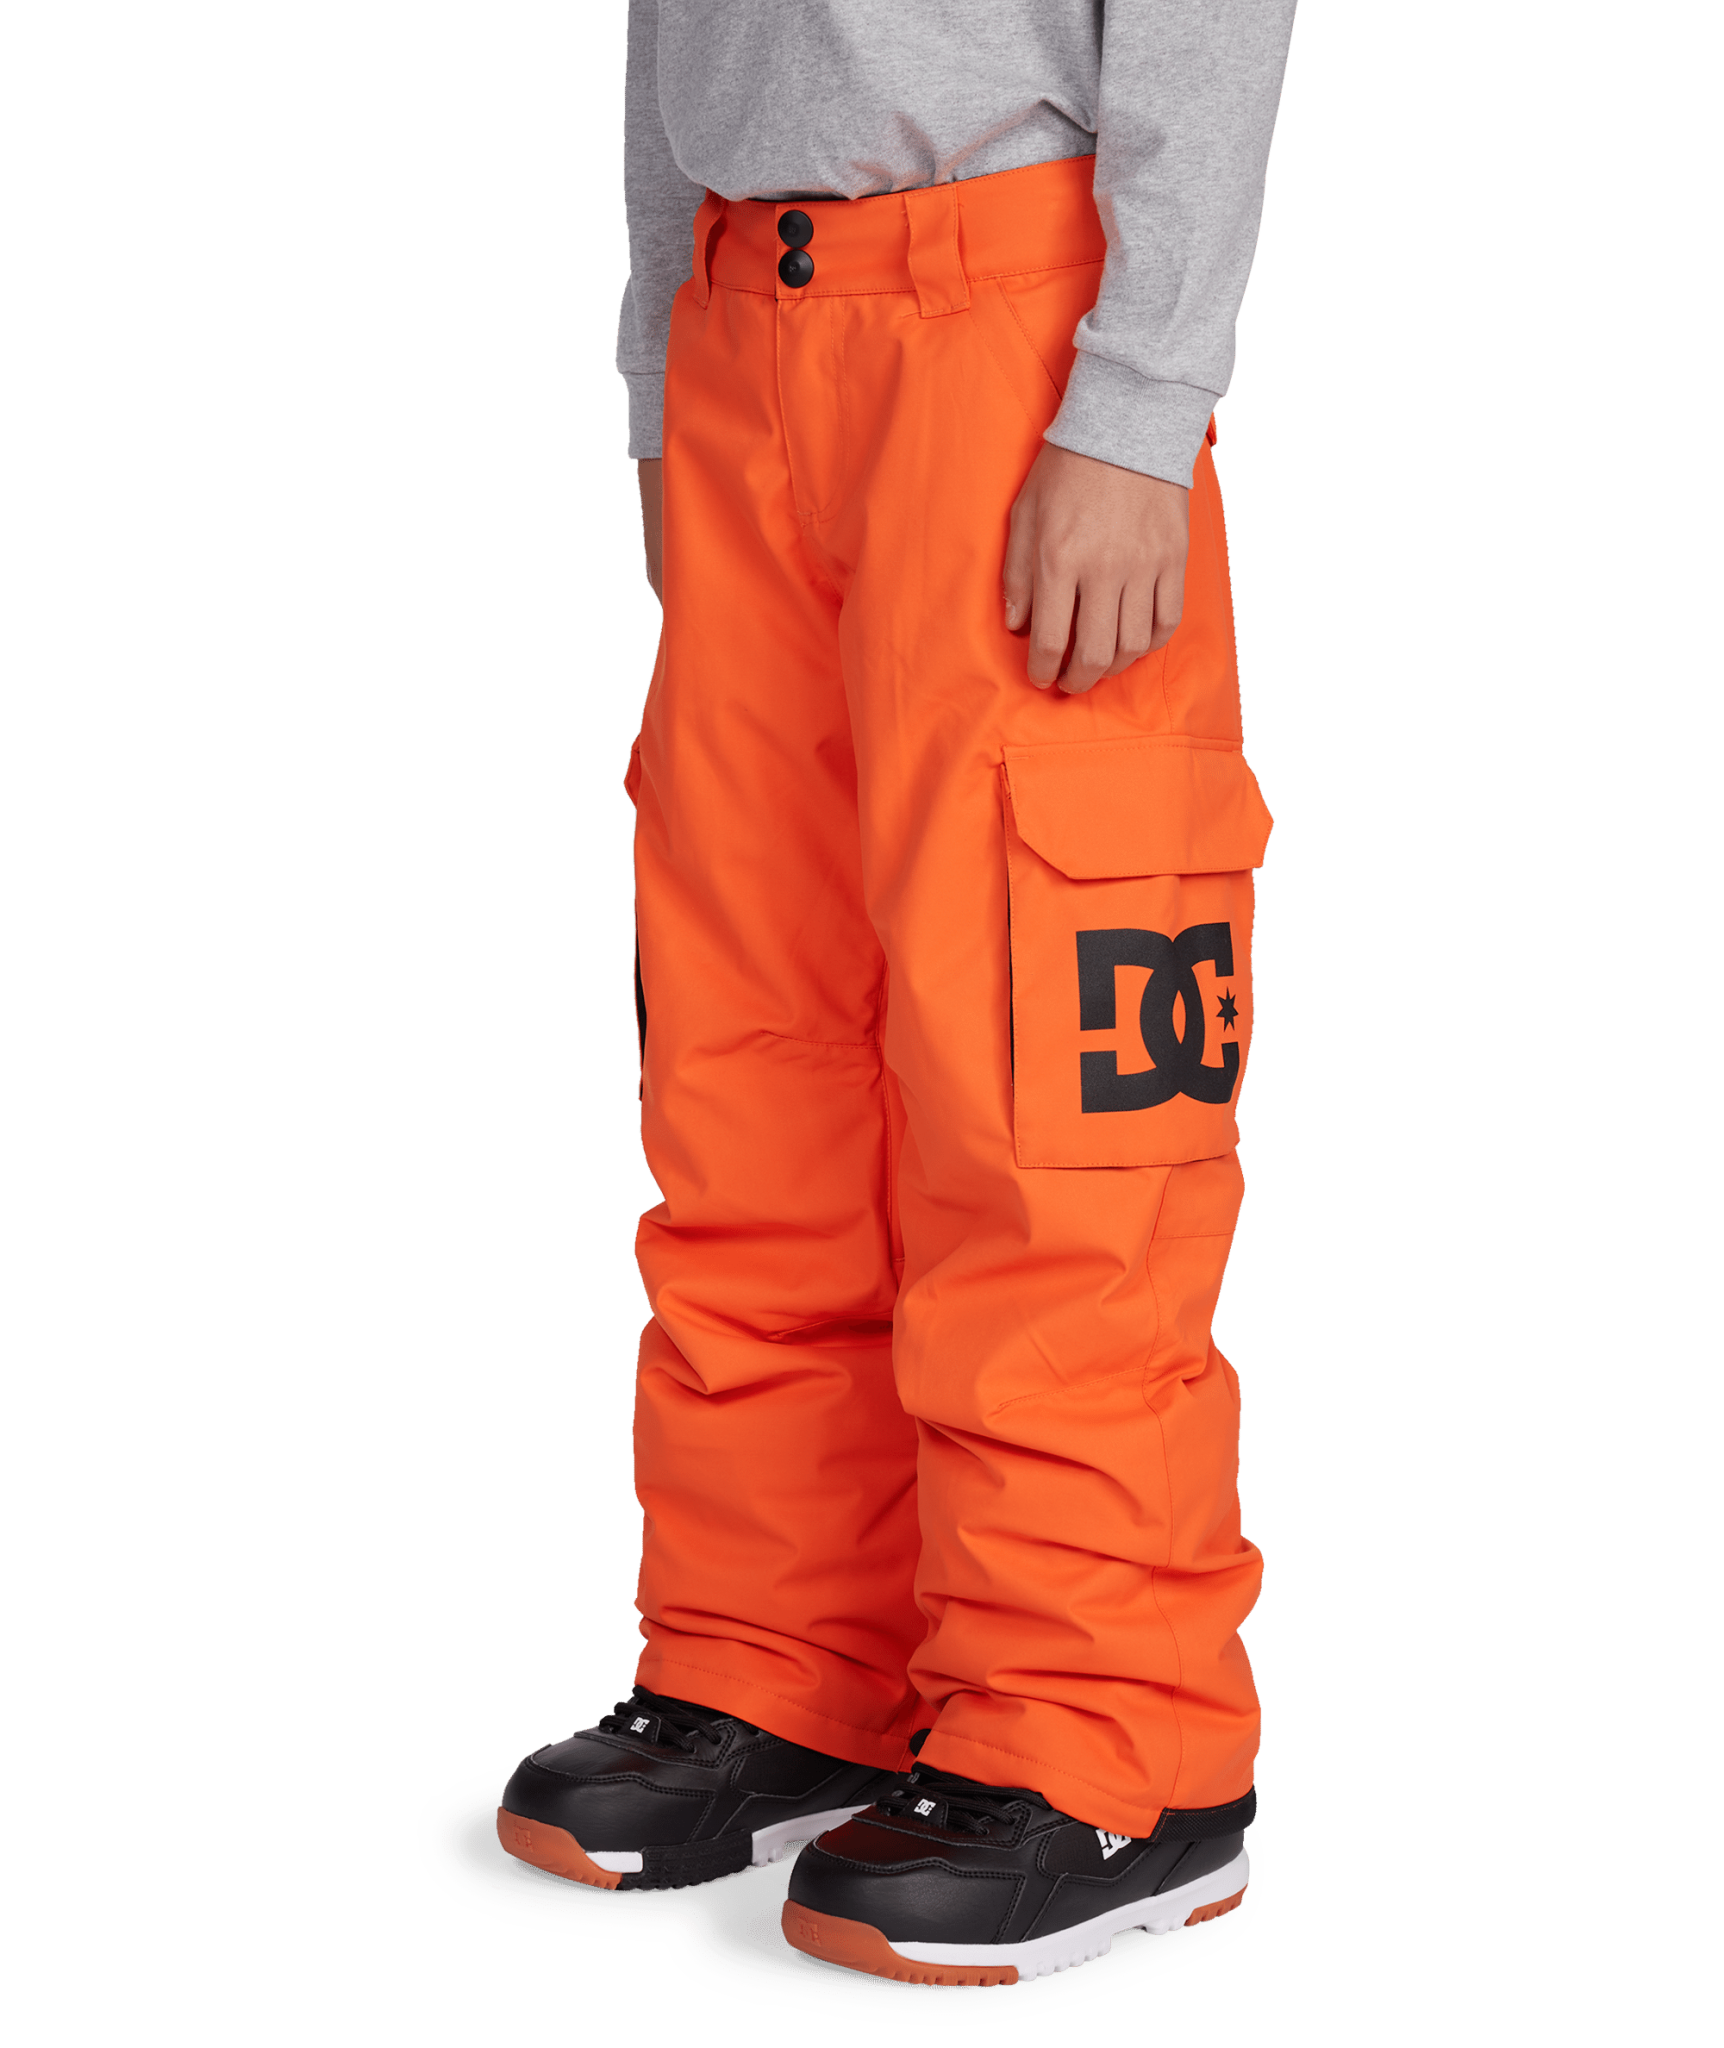 DC SHOES JUNIOR BANSHEE INSULATED PANTS, 12 &amp; 16 Years